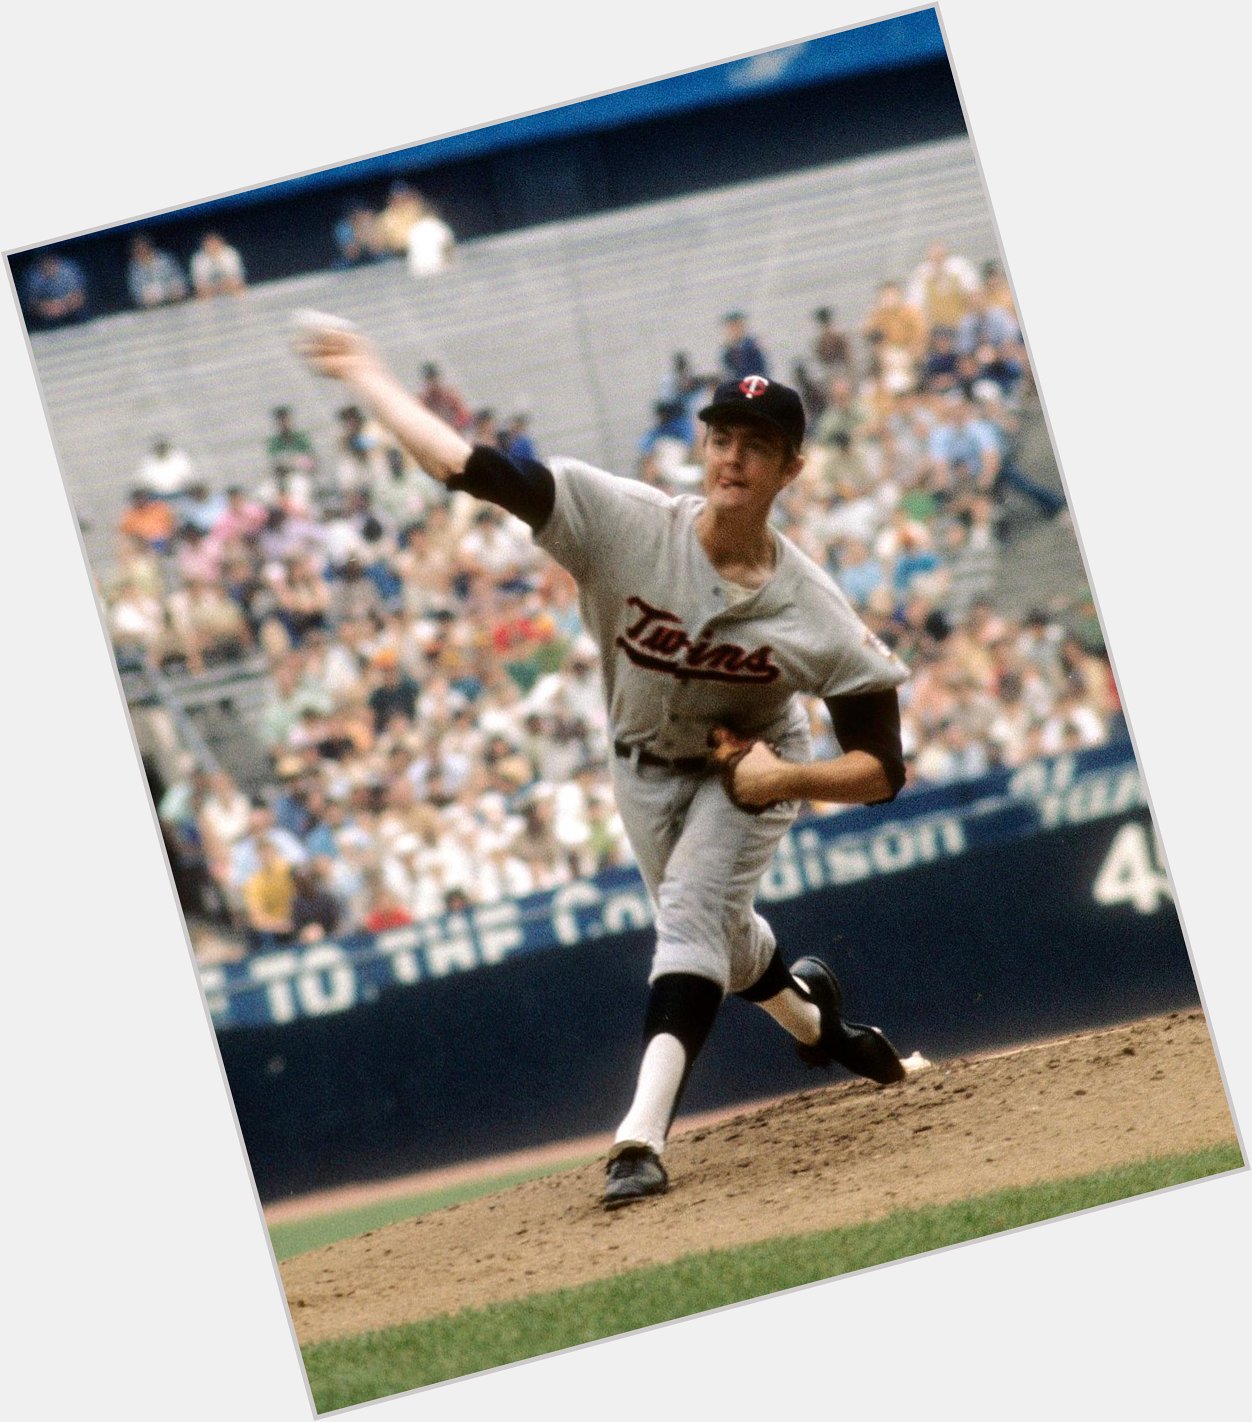 Happy 64th birthday to Bert Blyleven 36th all time with a 188 Hall Rating (11th among P).  